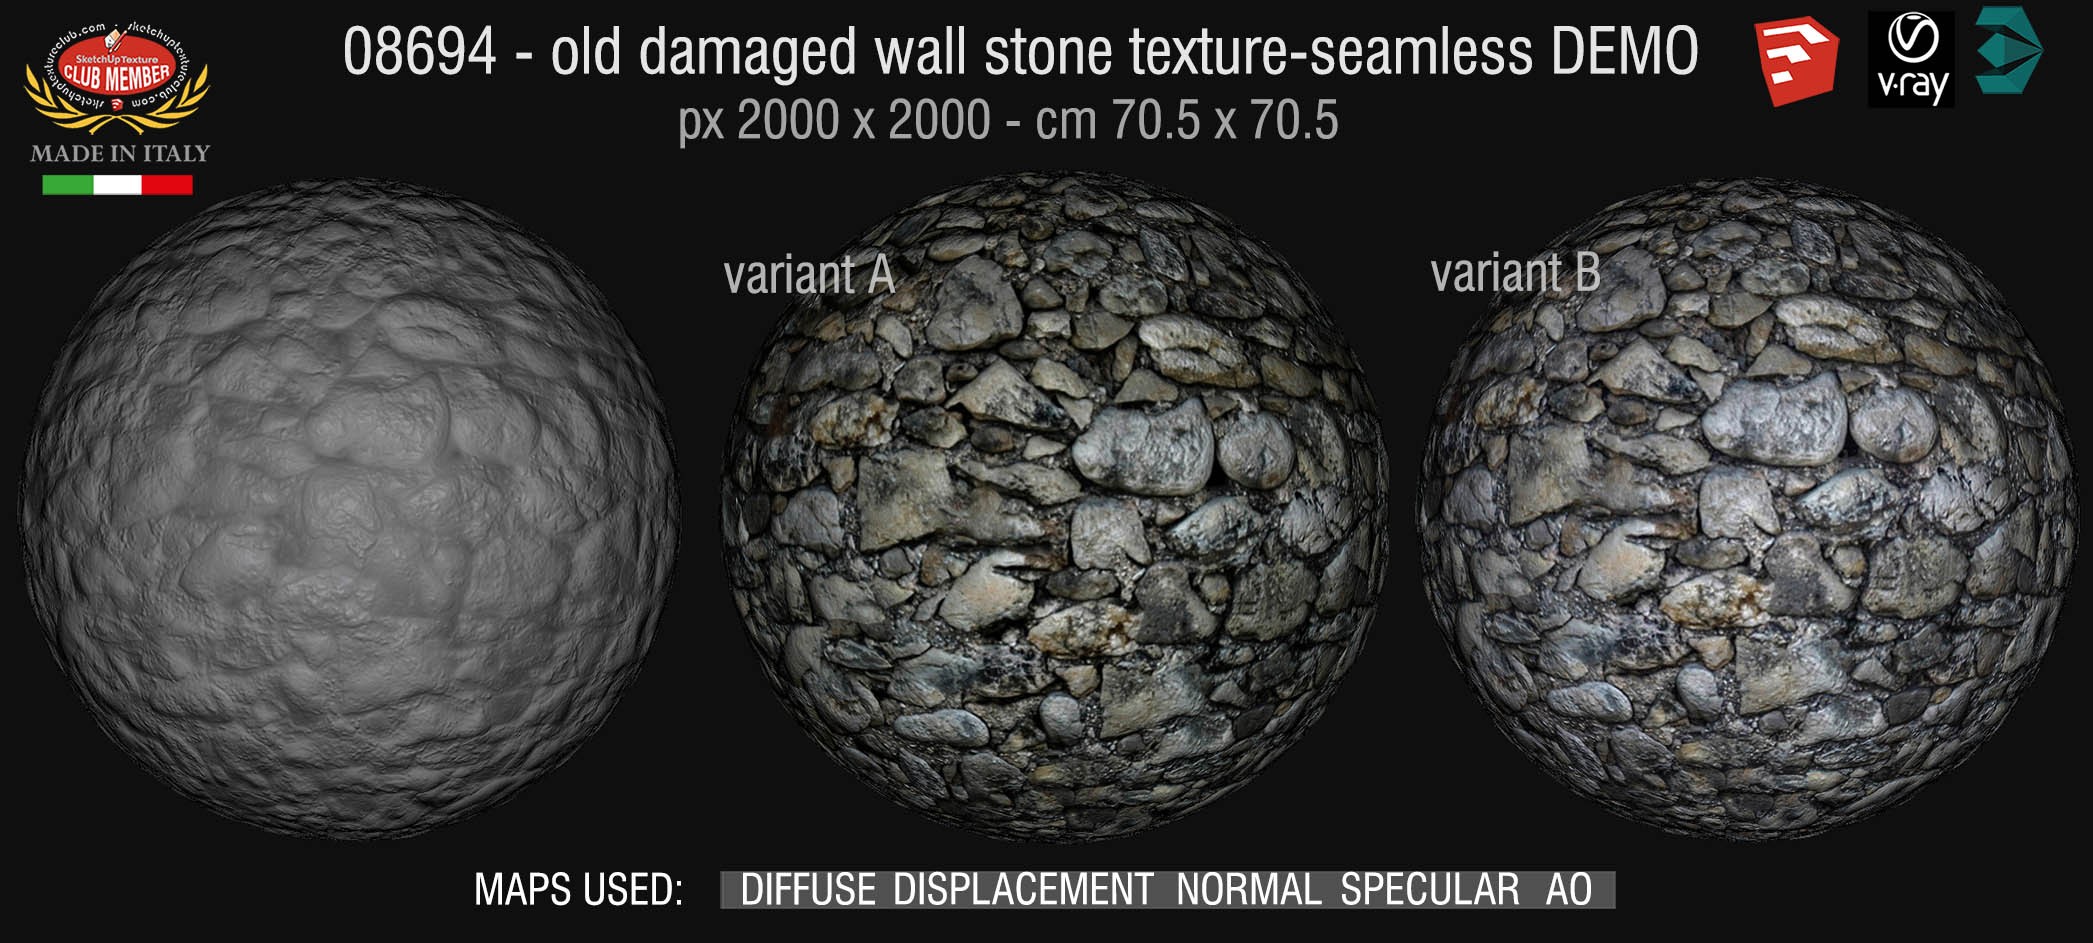 08694 HR Damaged wall stone texture seamless + maps DEMO